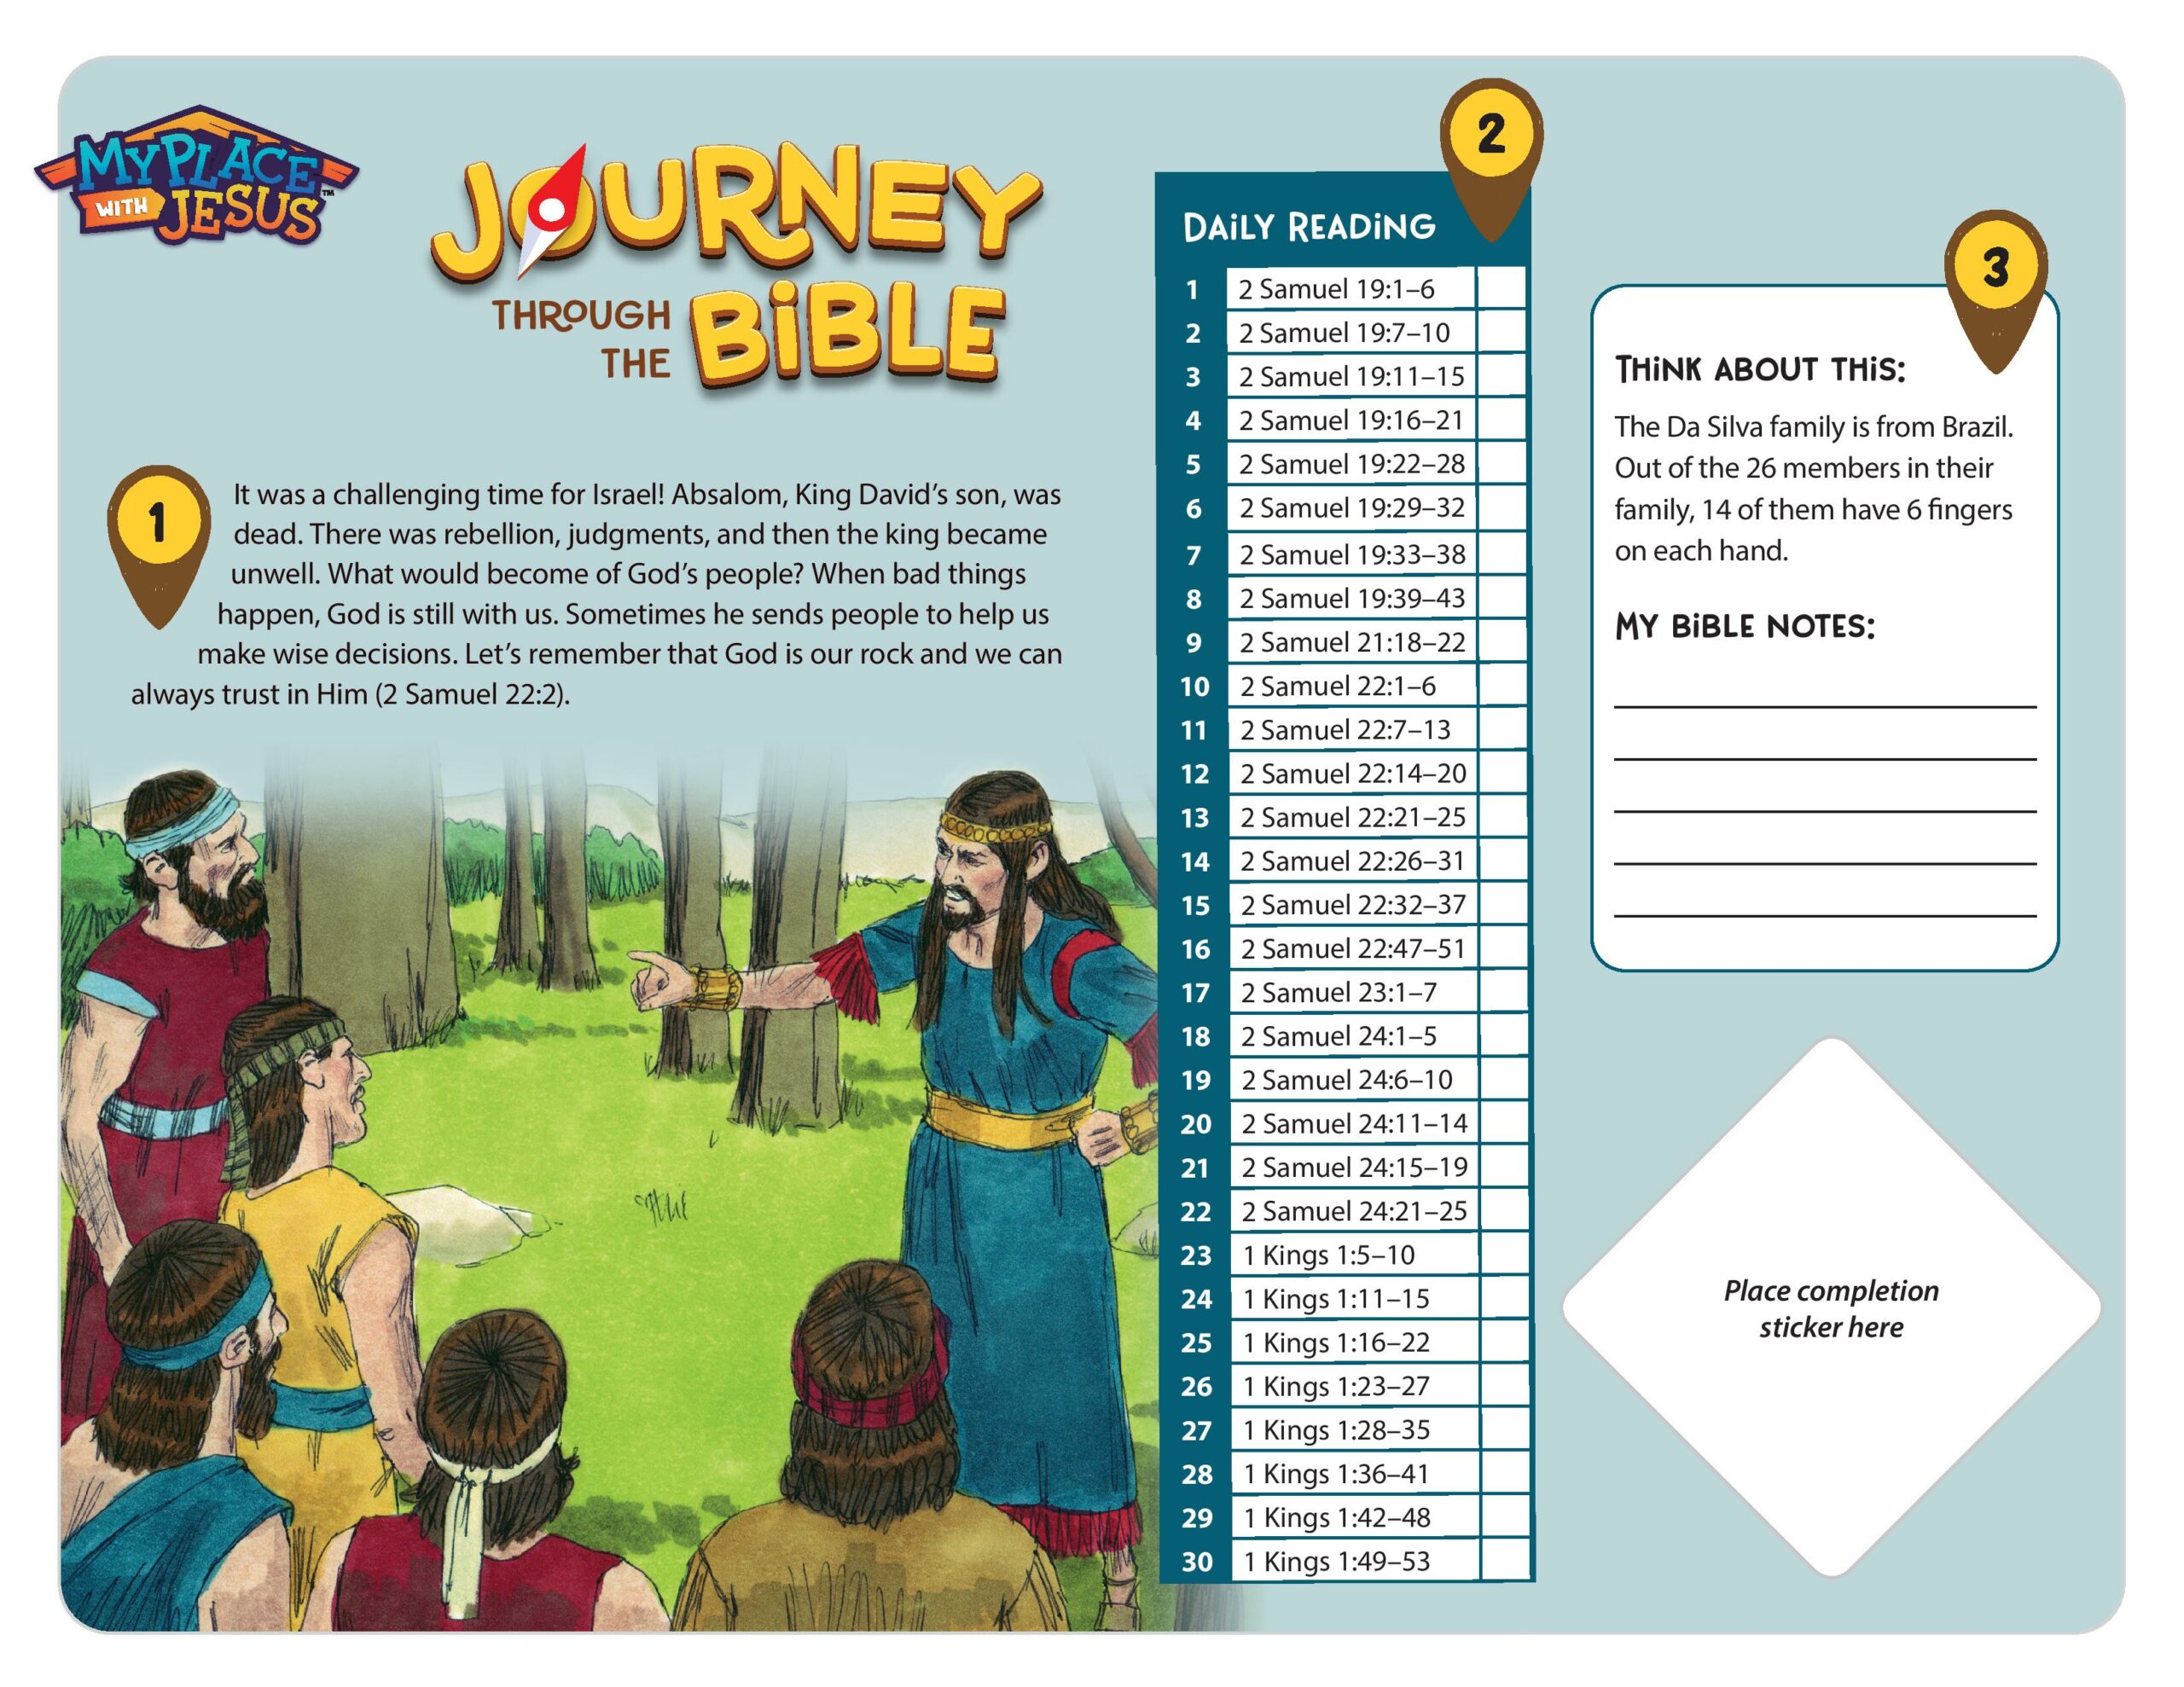 Journey through the Bible 18 tracking sheet